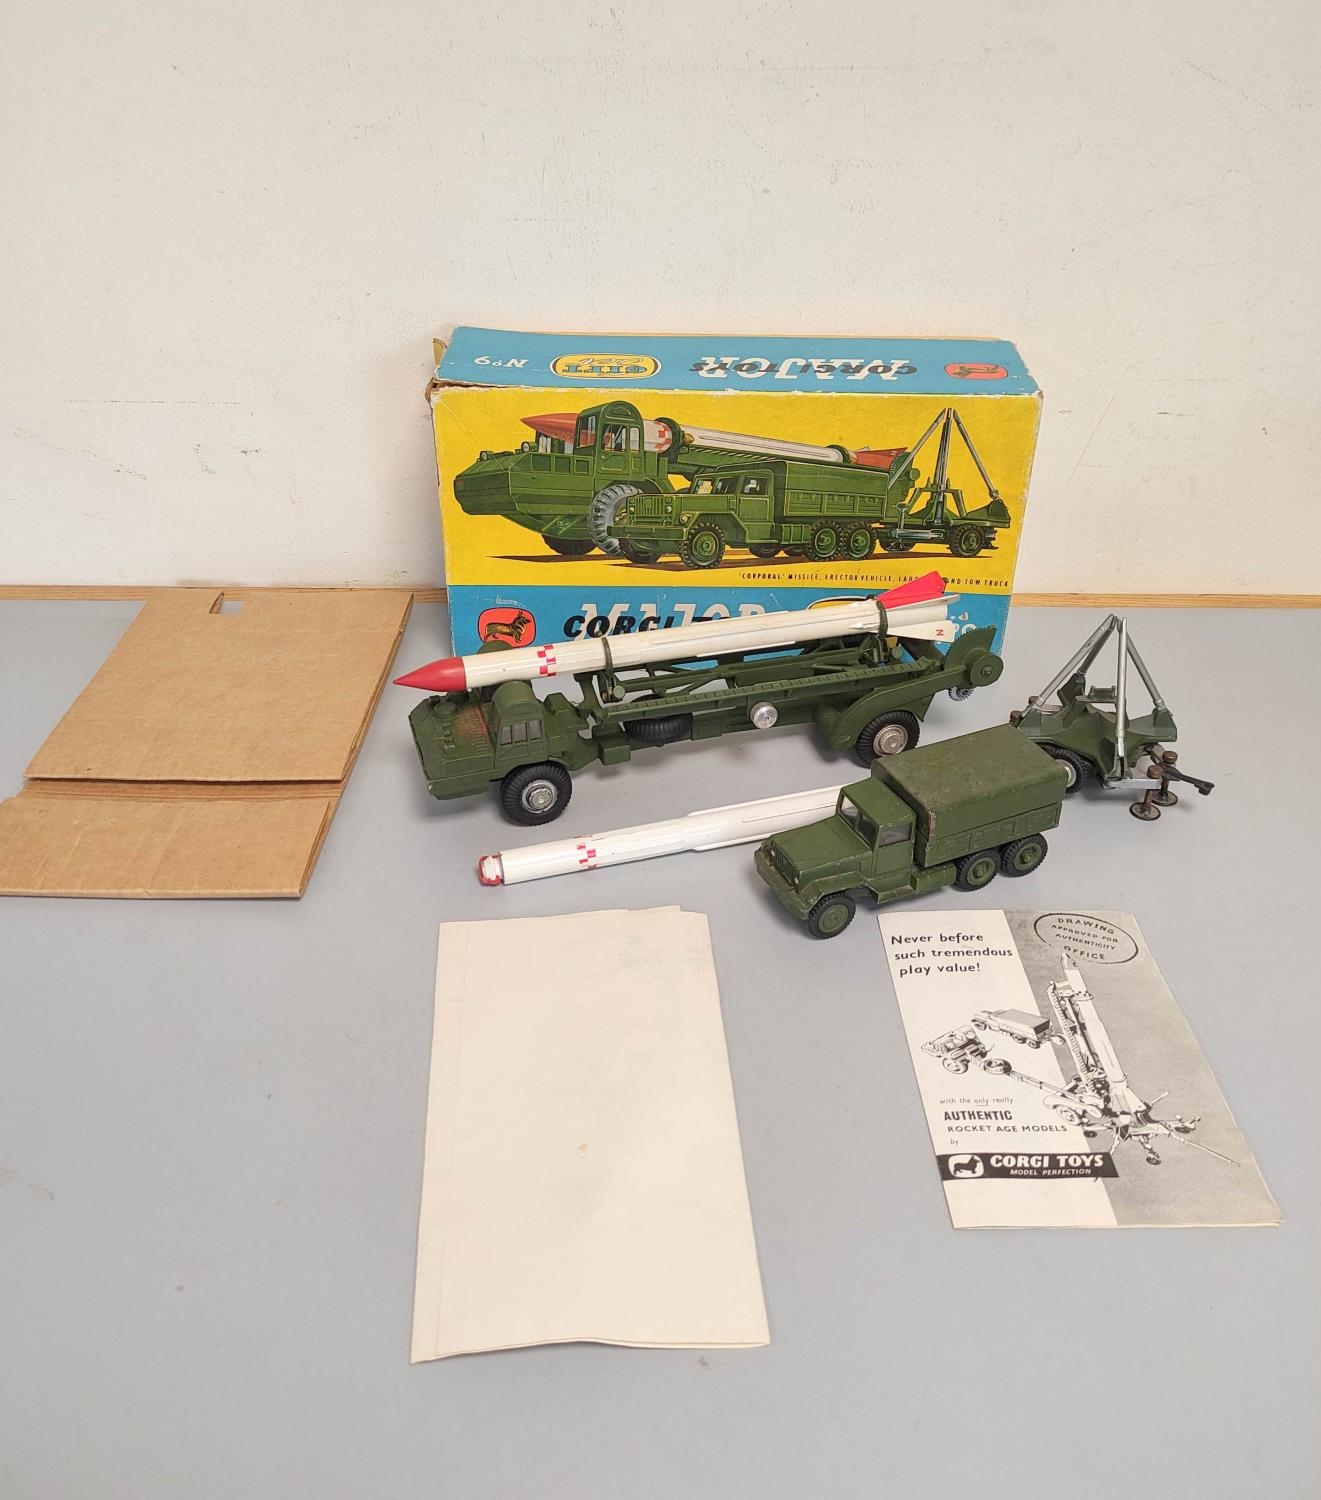 Corgi Toys. Major Gift Set No 9: 'Corporal' Missile, Erector Vehicle, Launcher and Town Truck. Boxed